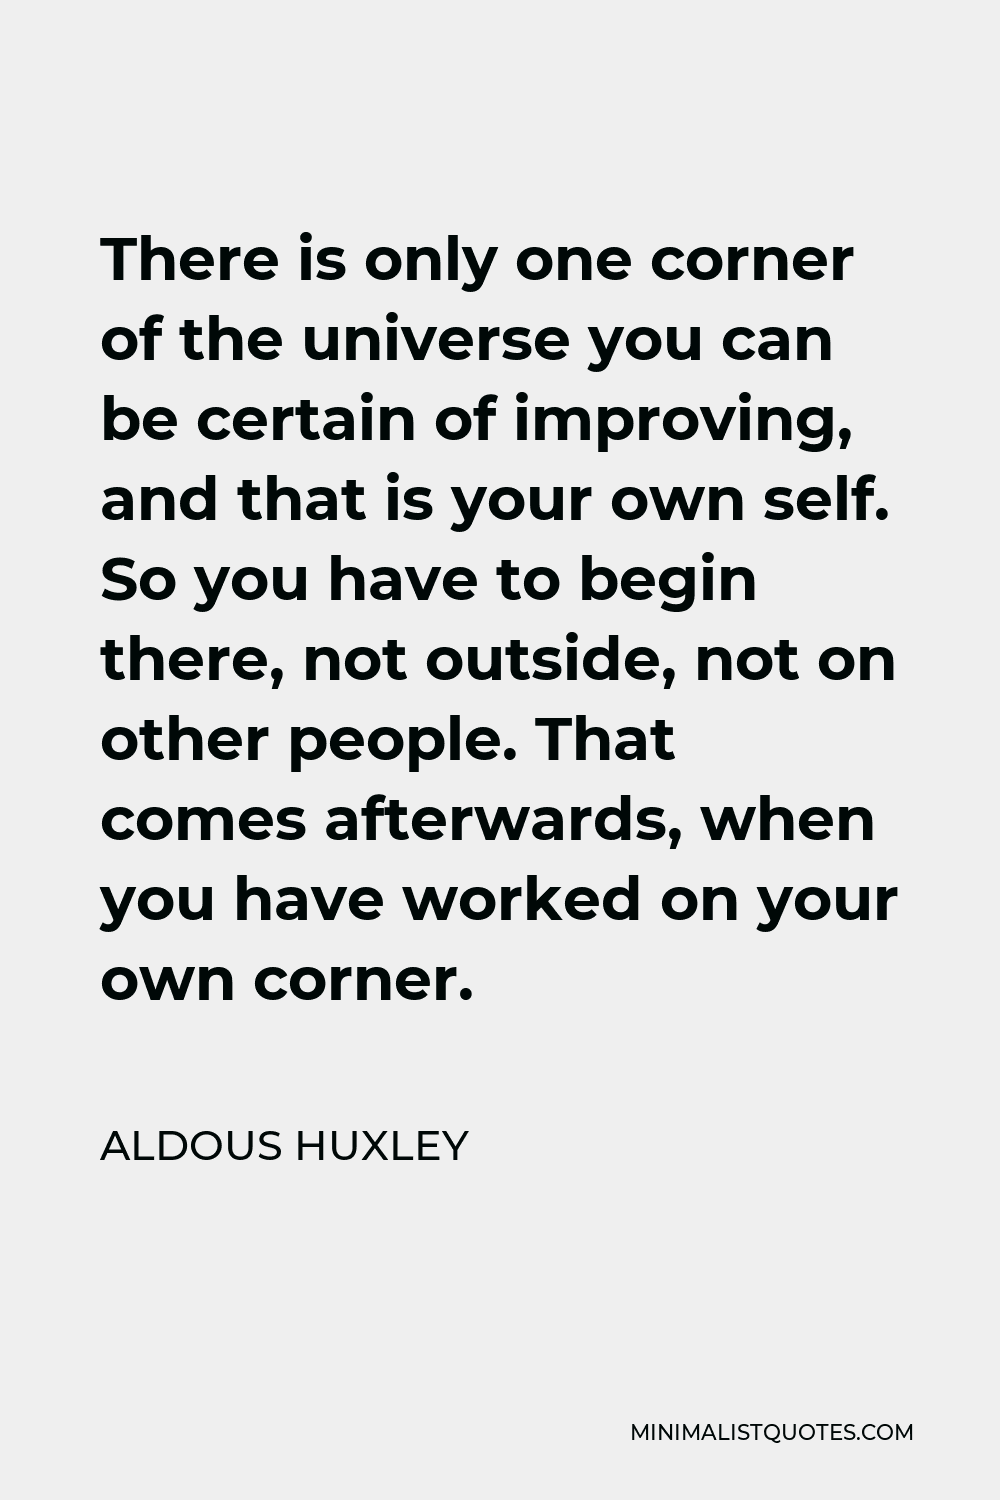 Aldous Huxley Quote - There is only one corner of the universe you can be certain of improving, and that’s your own self.